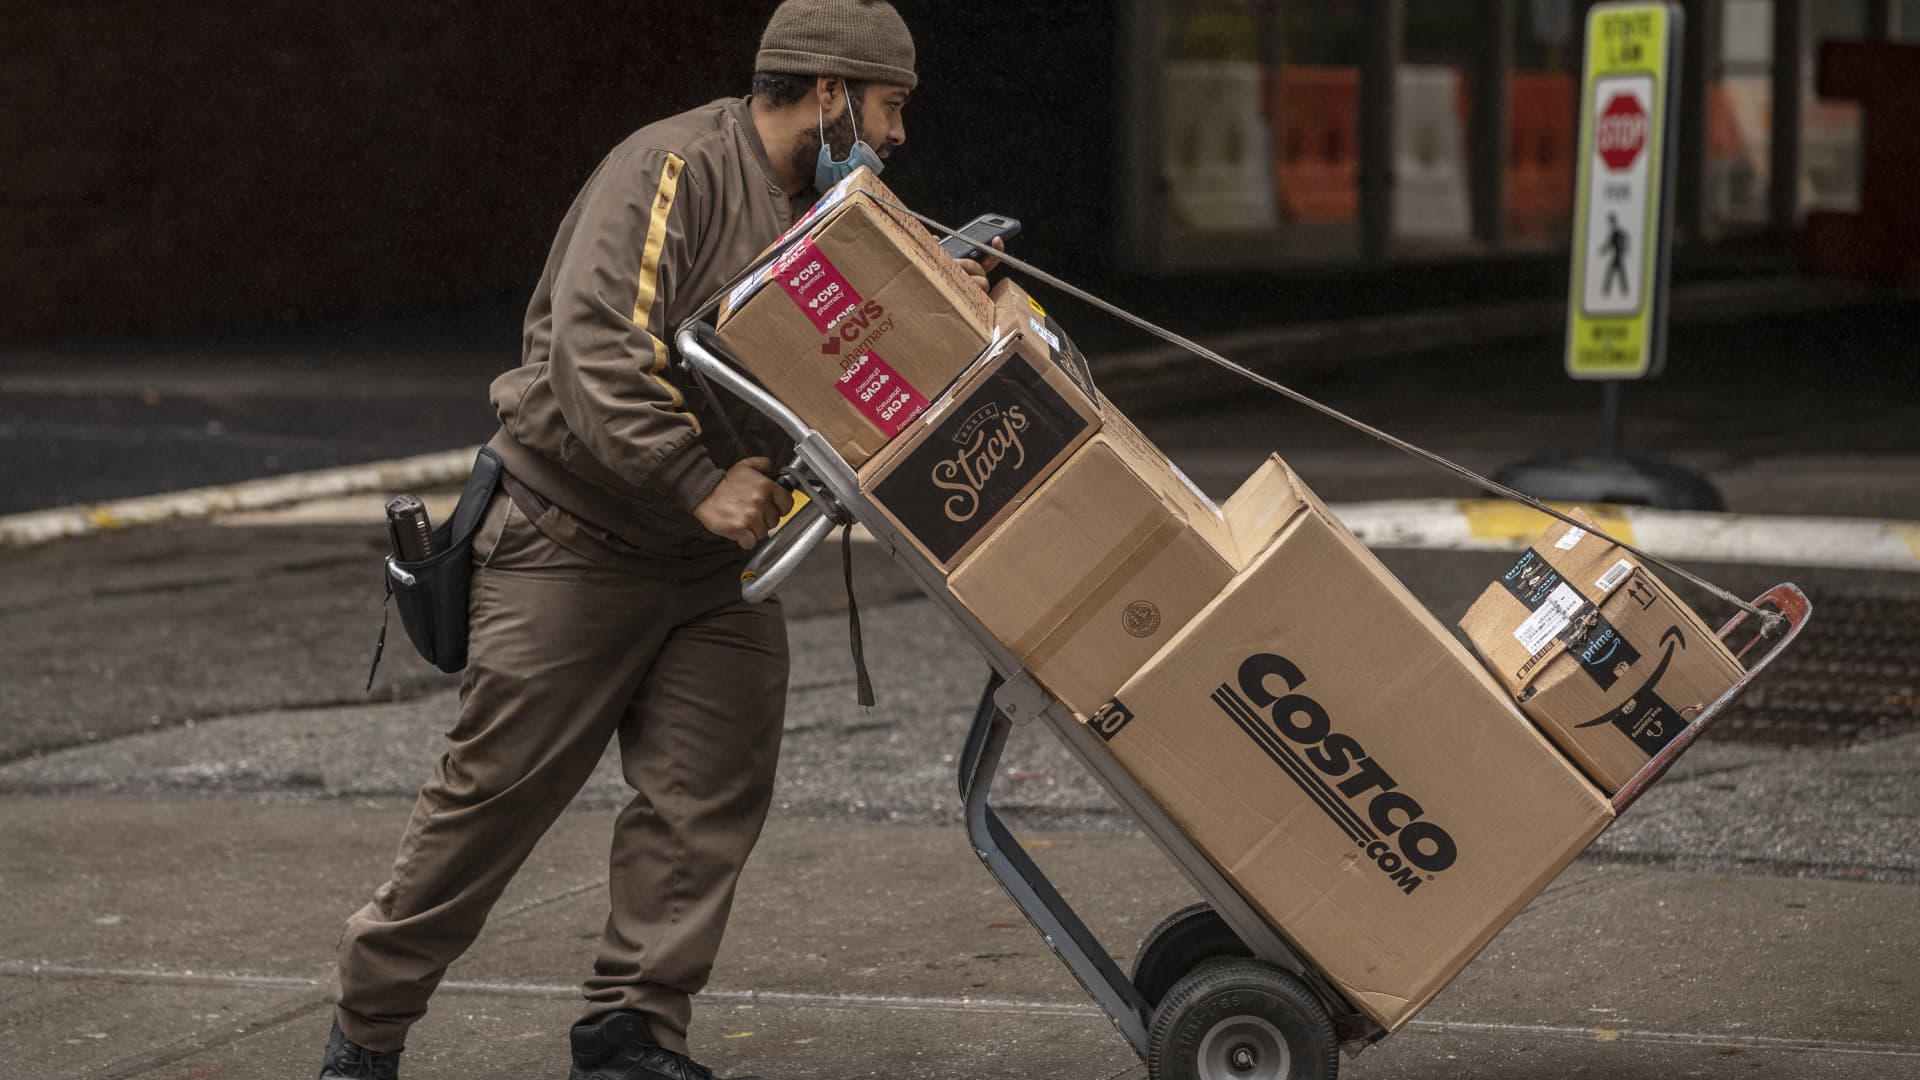 A United Parcel Service Inc. (UPS) driver delivers boxes in New York, U.S., on Tuesday, Oct. 13, 2020.